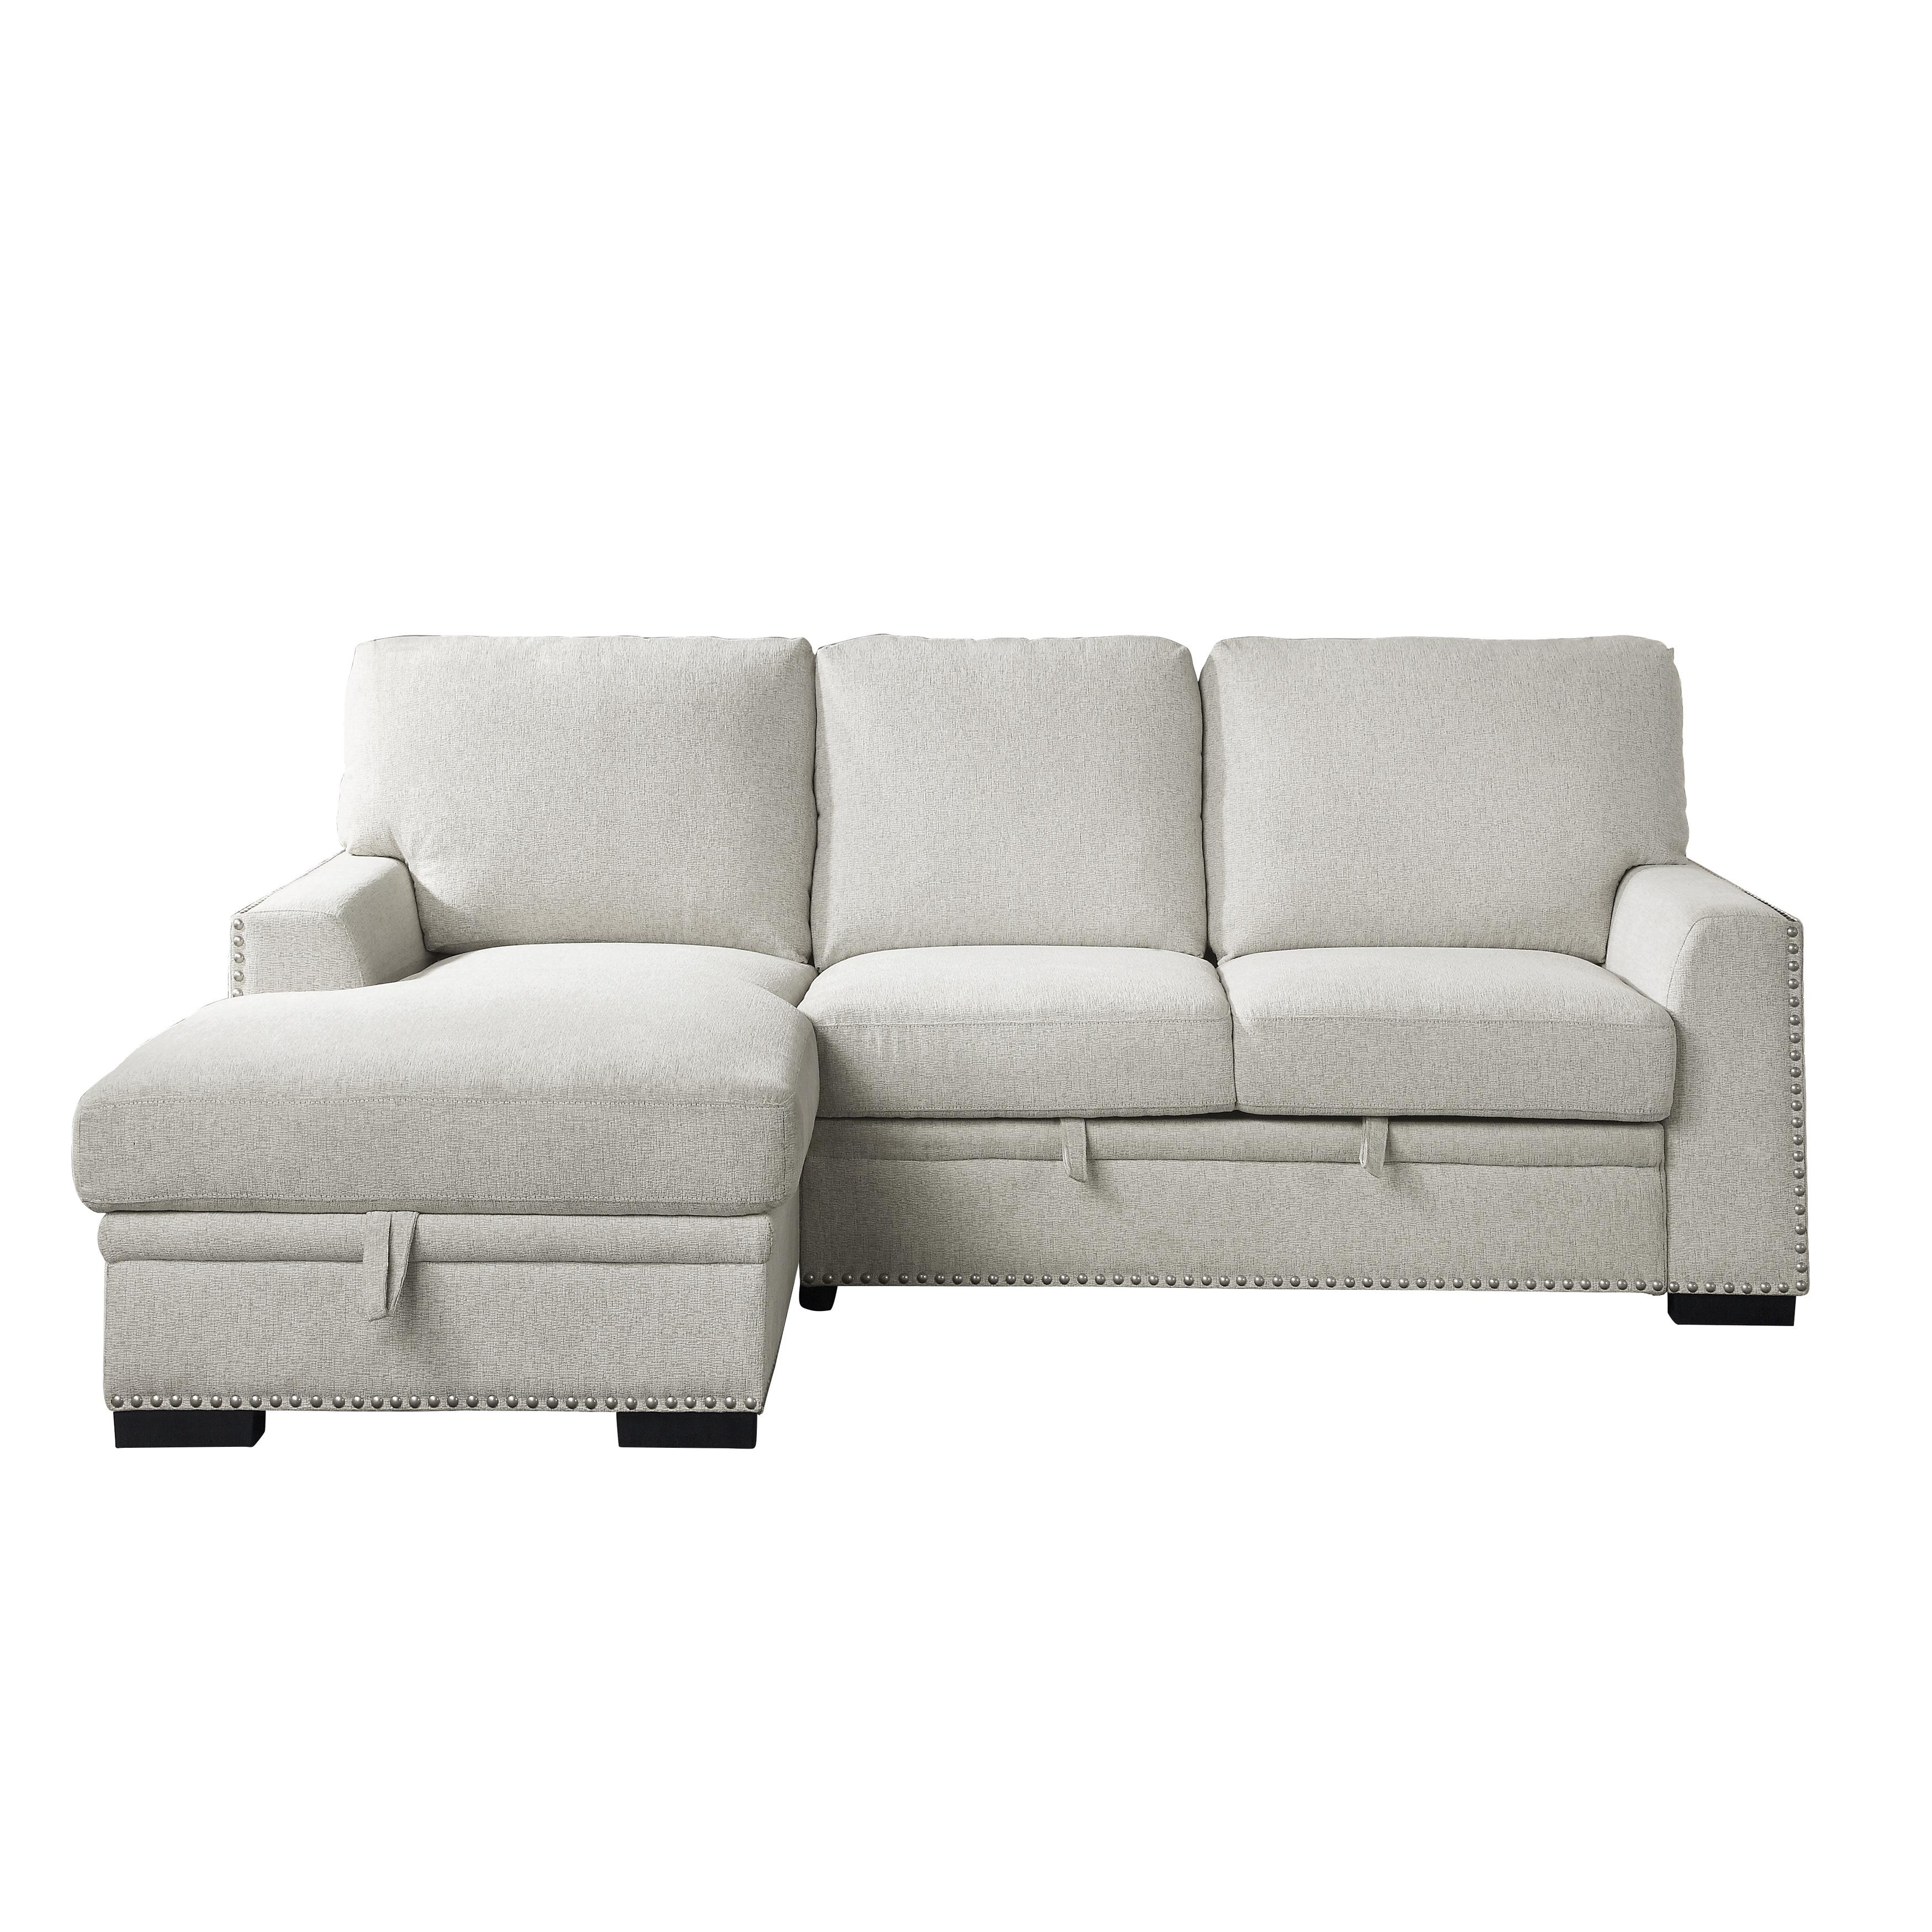 Modern Sectional 9468BE*2LC2R Morelia 9468BE*2LC2R in Beige Chenille